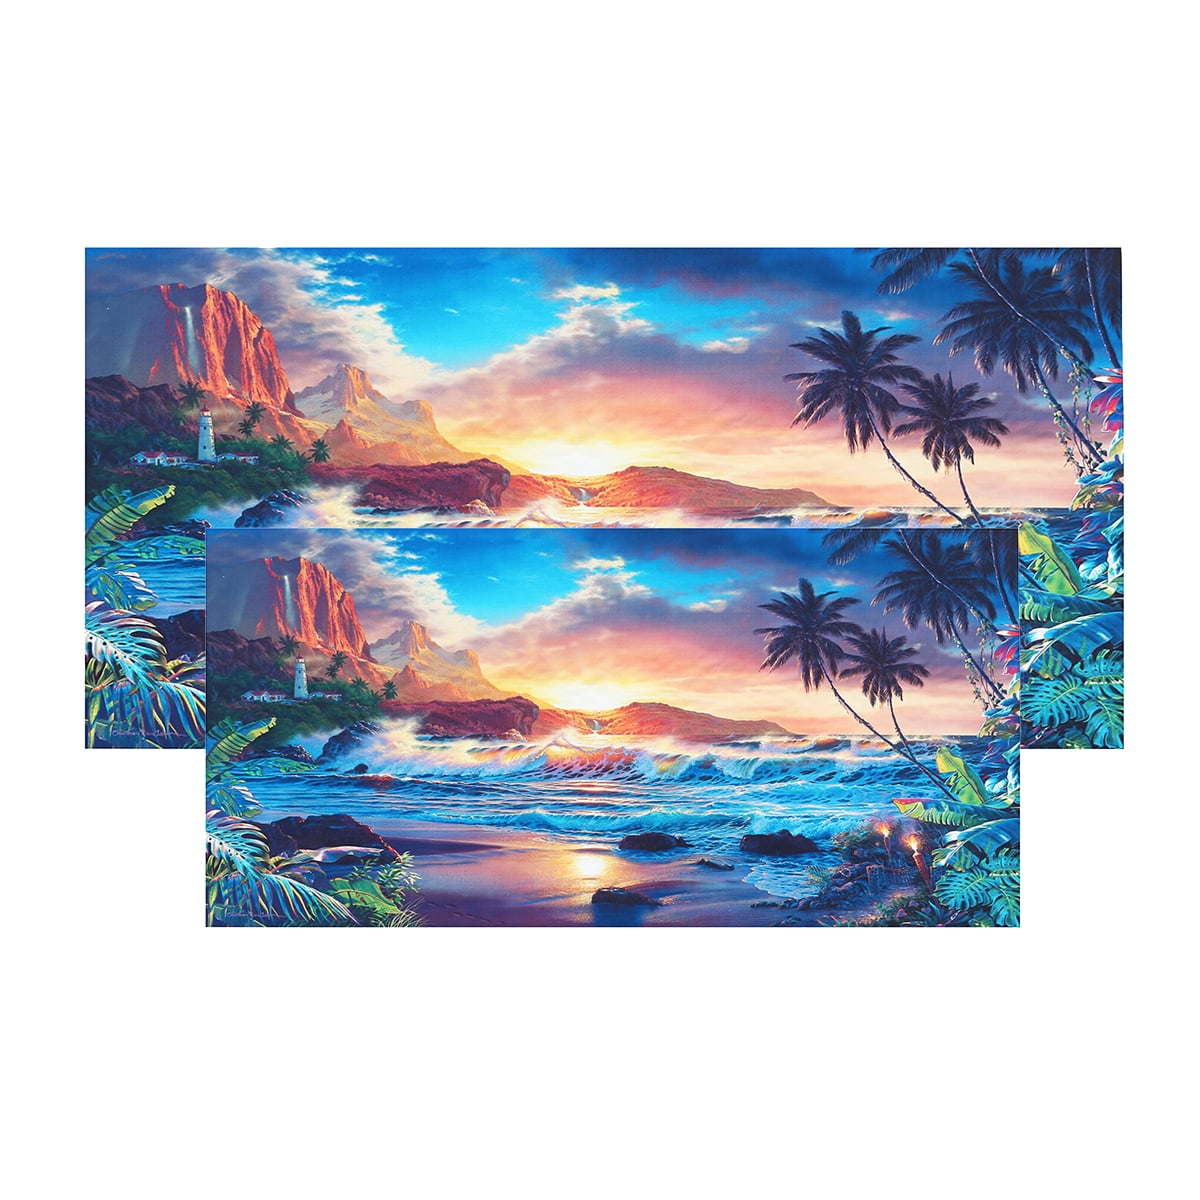 Padsin Art Sunset Square Canvas Wall Art Painting Ocean Waves Print on Canvas Painting Modern Seascape Ready to Hang for Home Living Room Bedroom Decoration